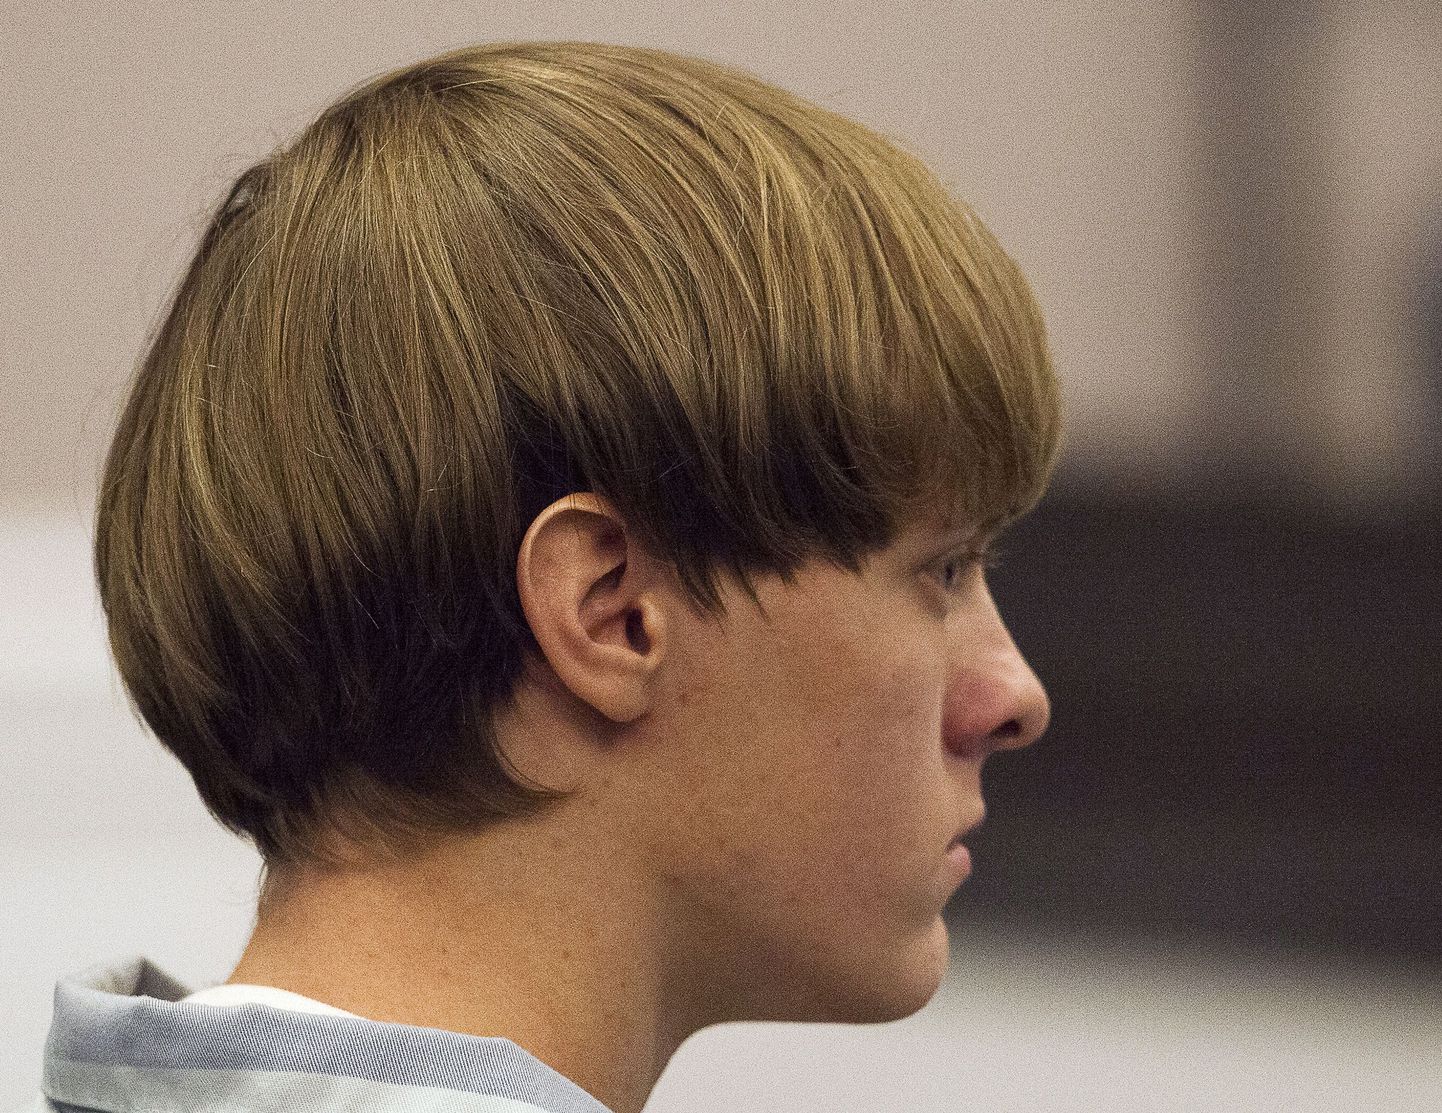 Dylann Storm Roof.